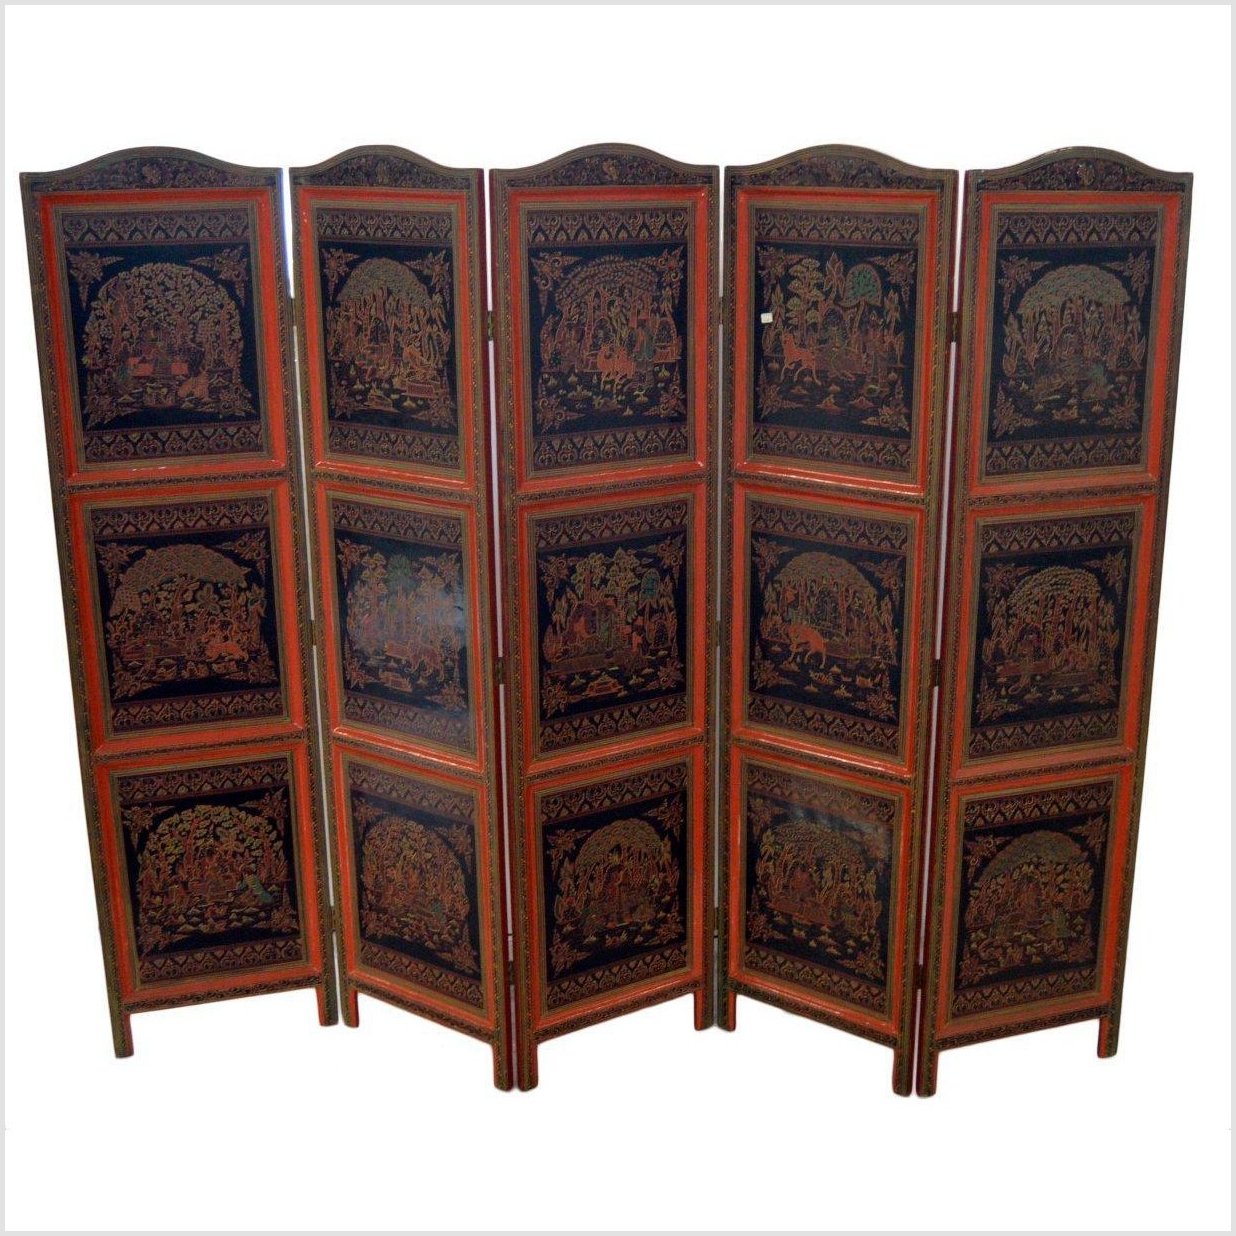 4-Panel Middle Eastern Art Inspired Screen-YN2844-14. Asian & Chinese Furniture, Art, Antiques, Vintage Home Décor for sale at FEA Home